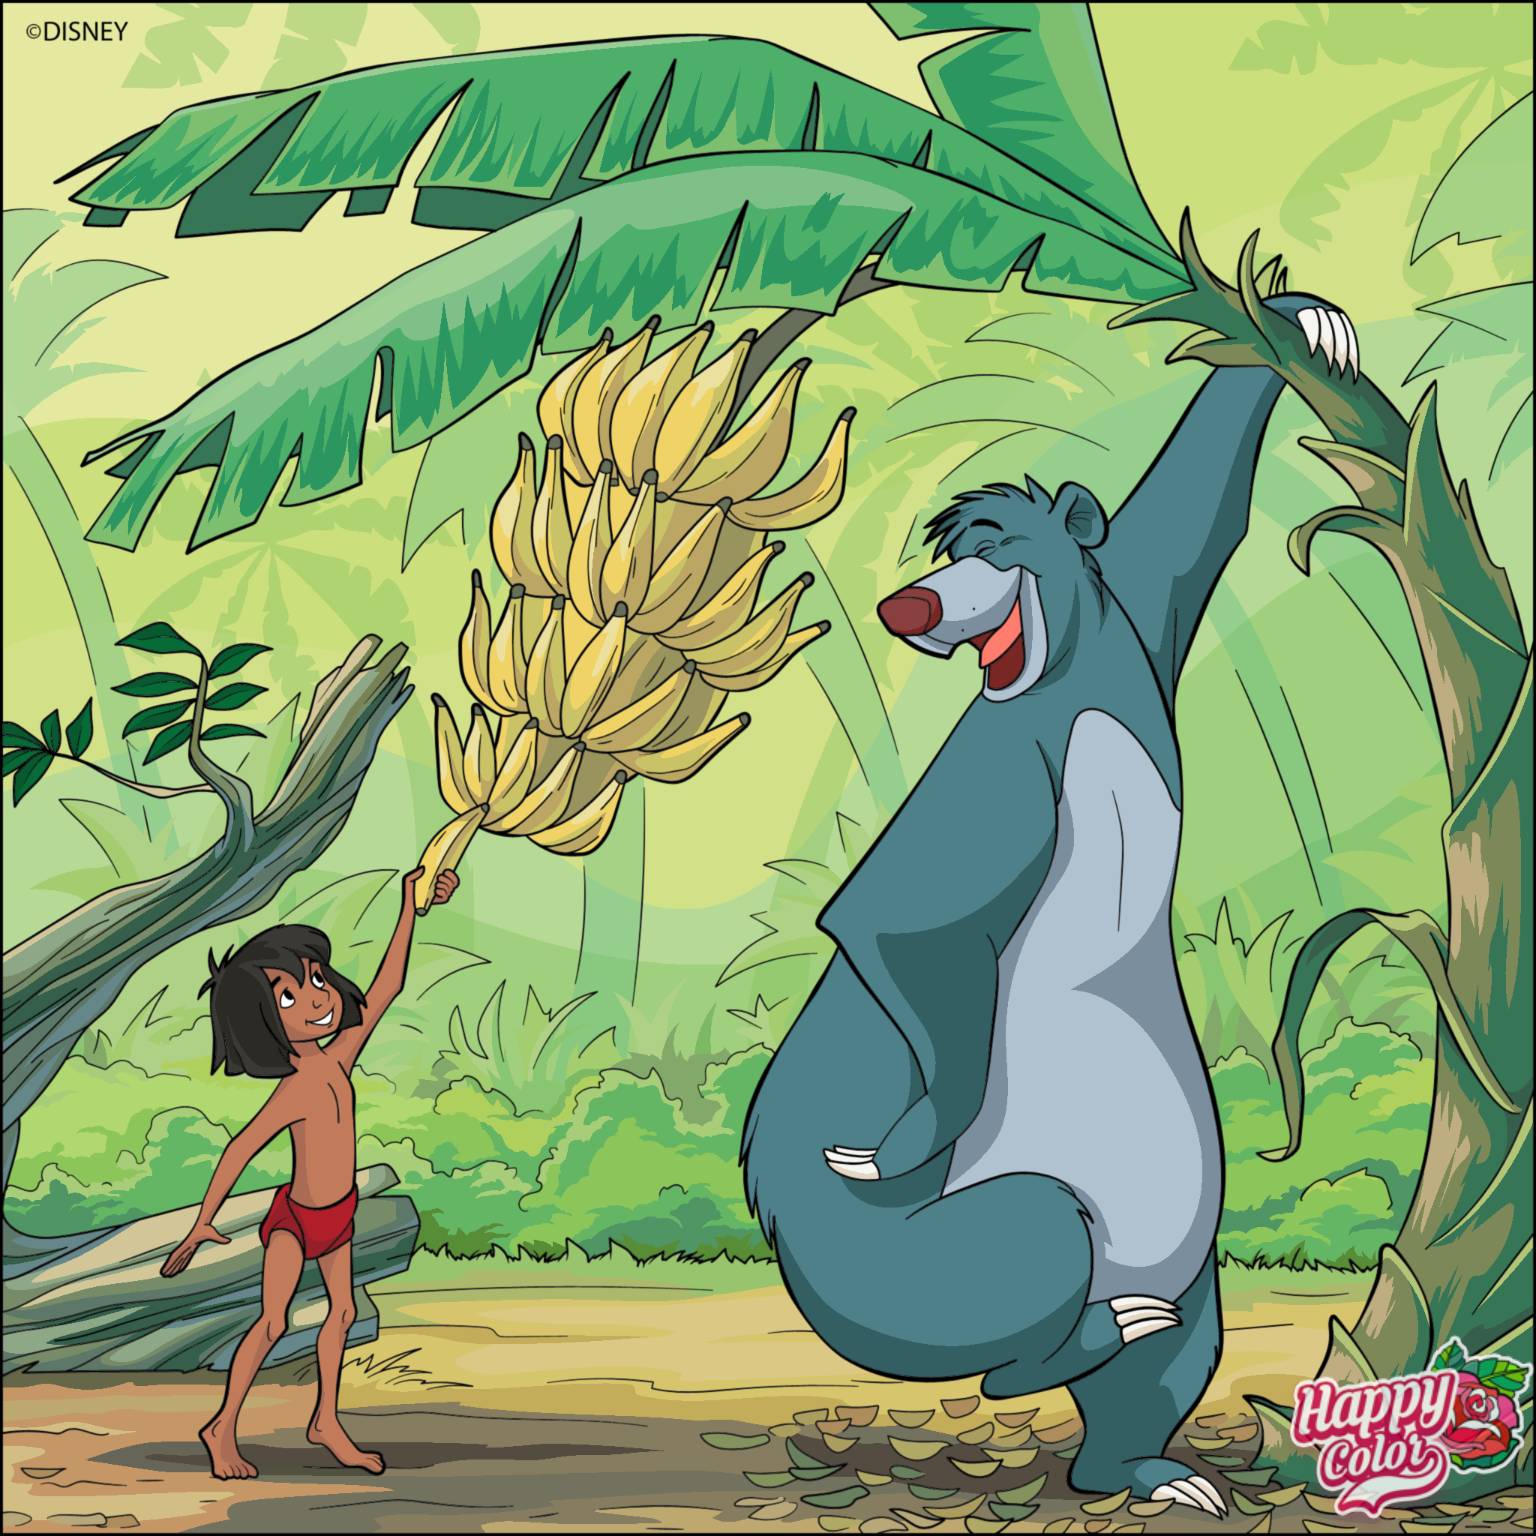 The Bare Necessities by PPG2009 on DeviantArt